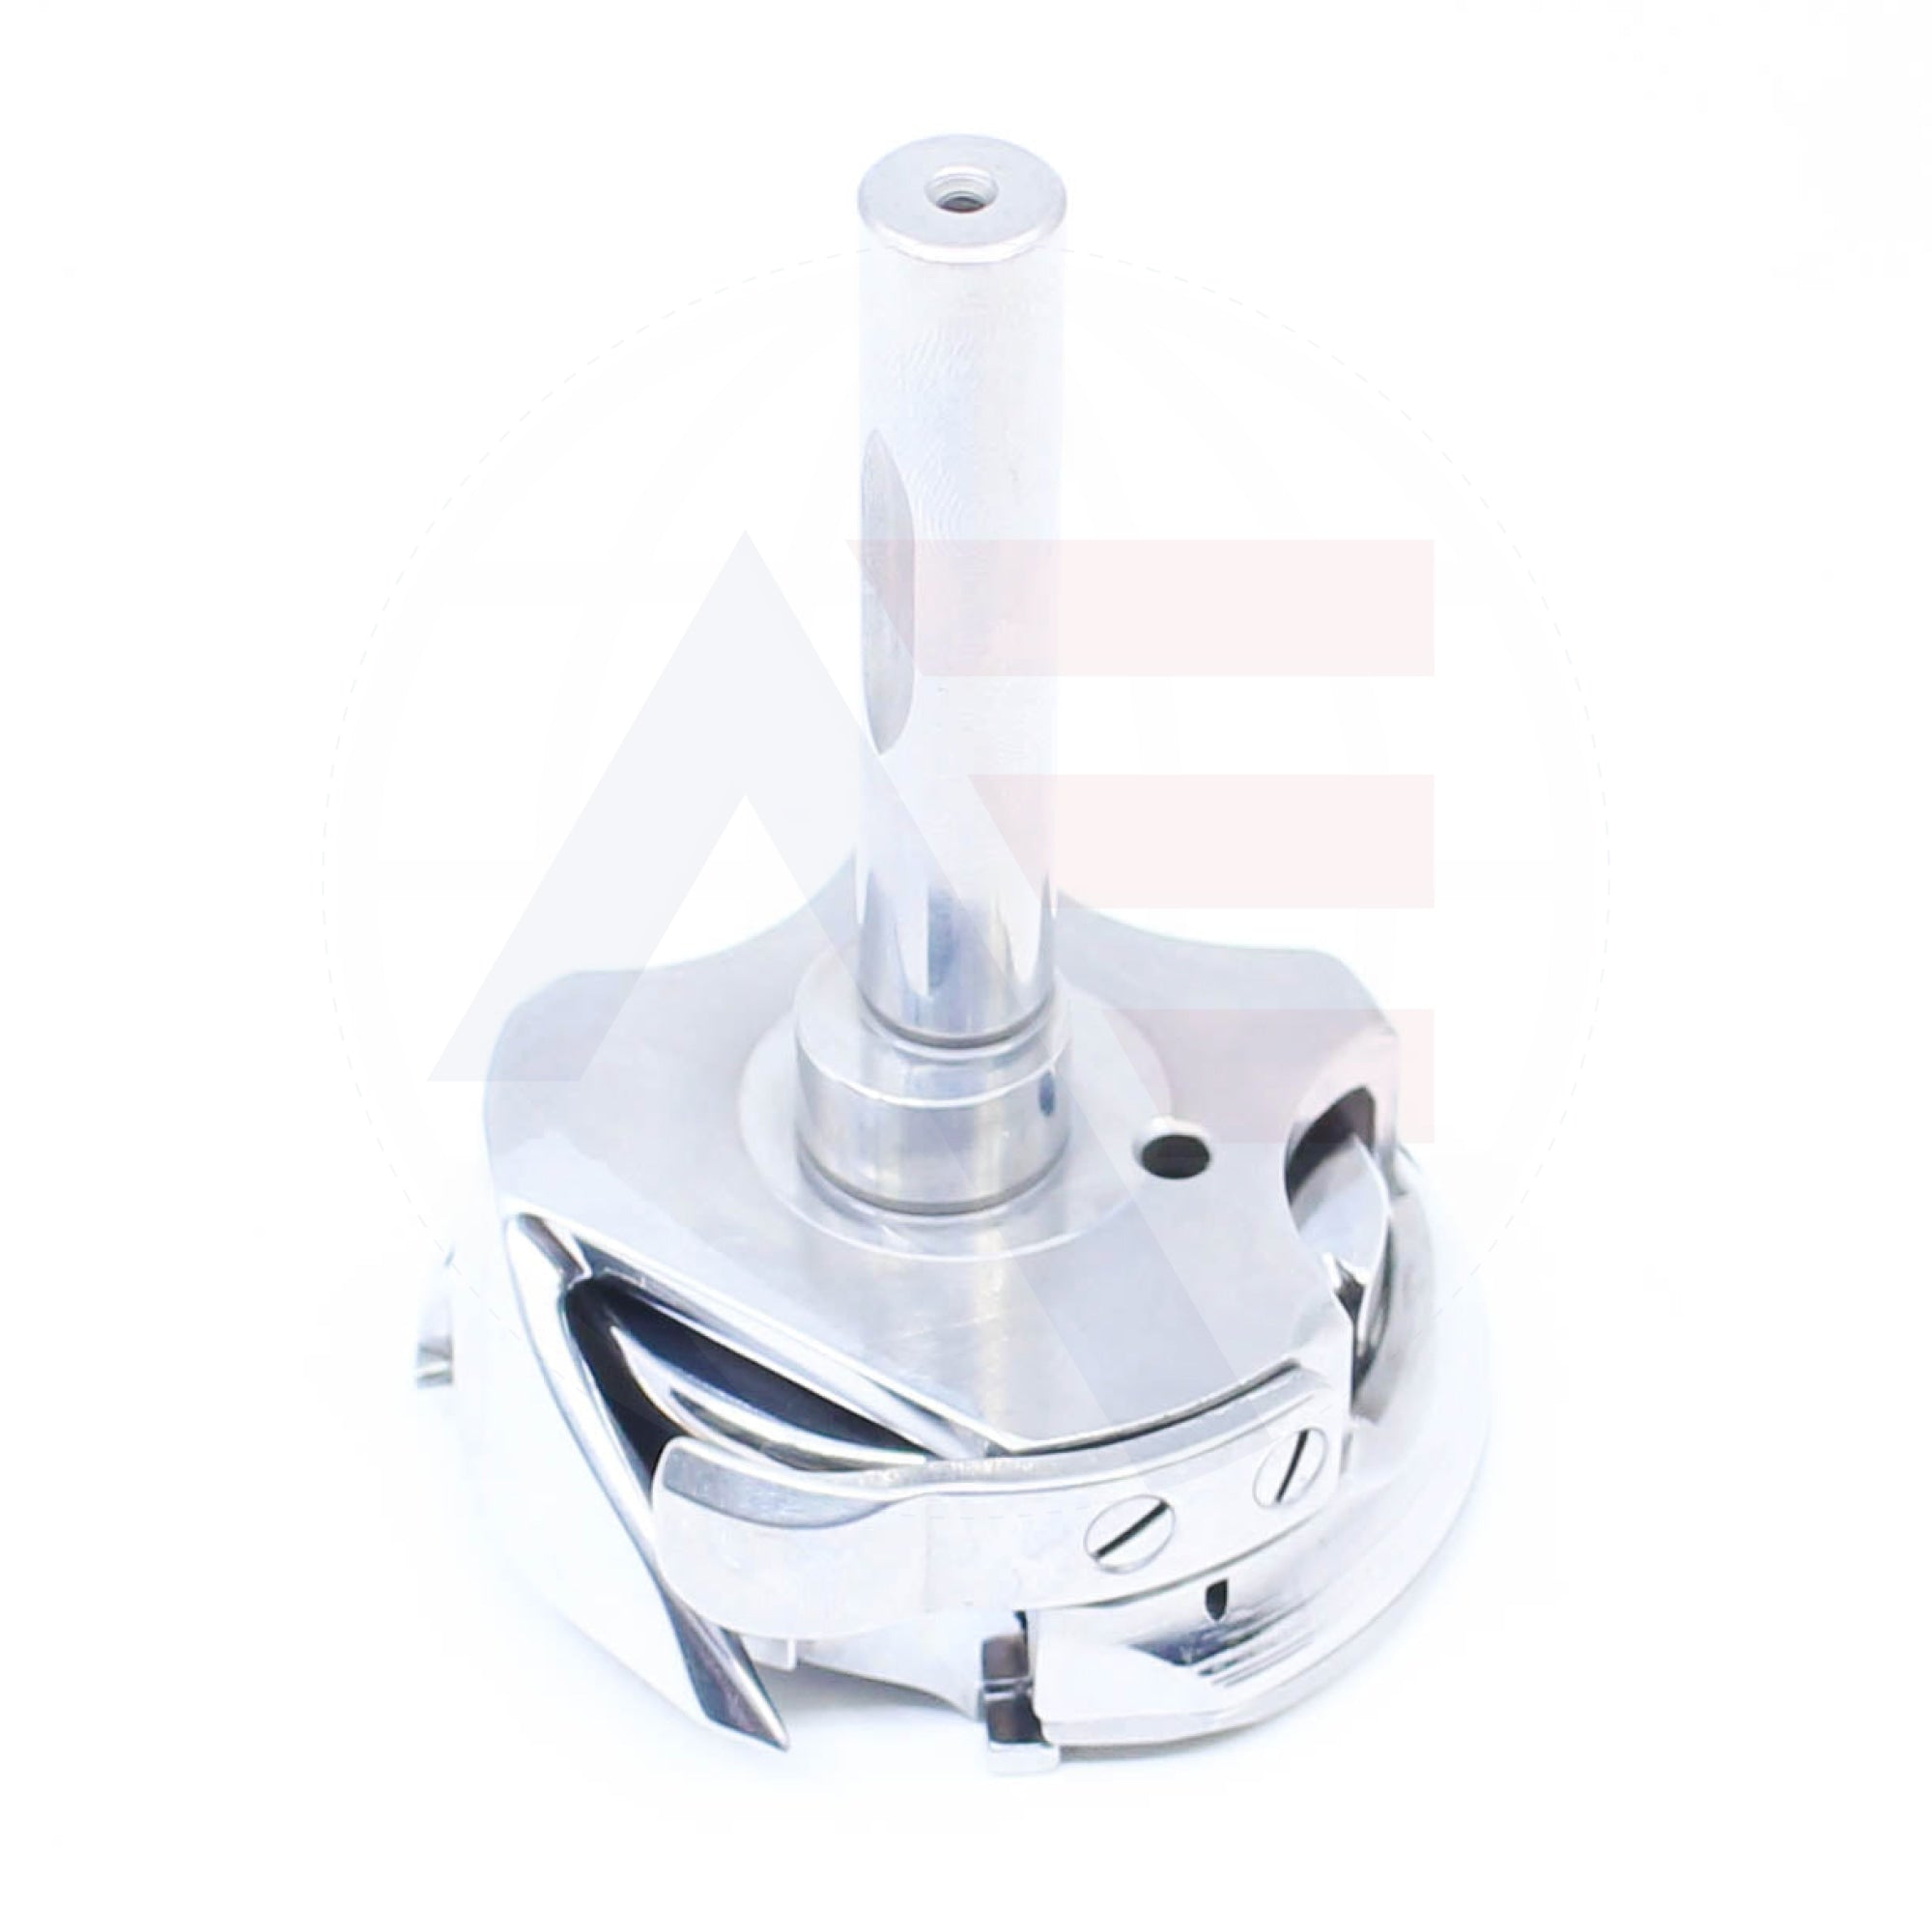 Hsh445Sp Hook And Base Sewing Machine Spare Parts